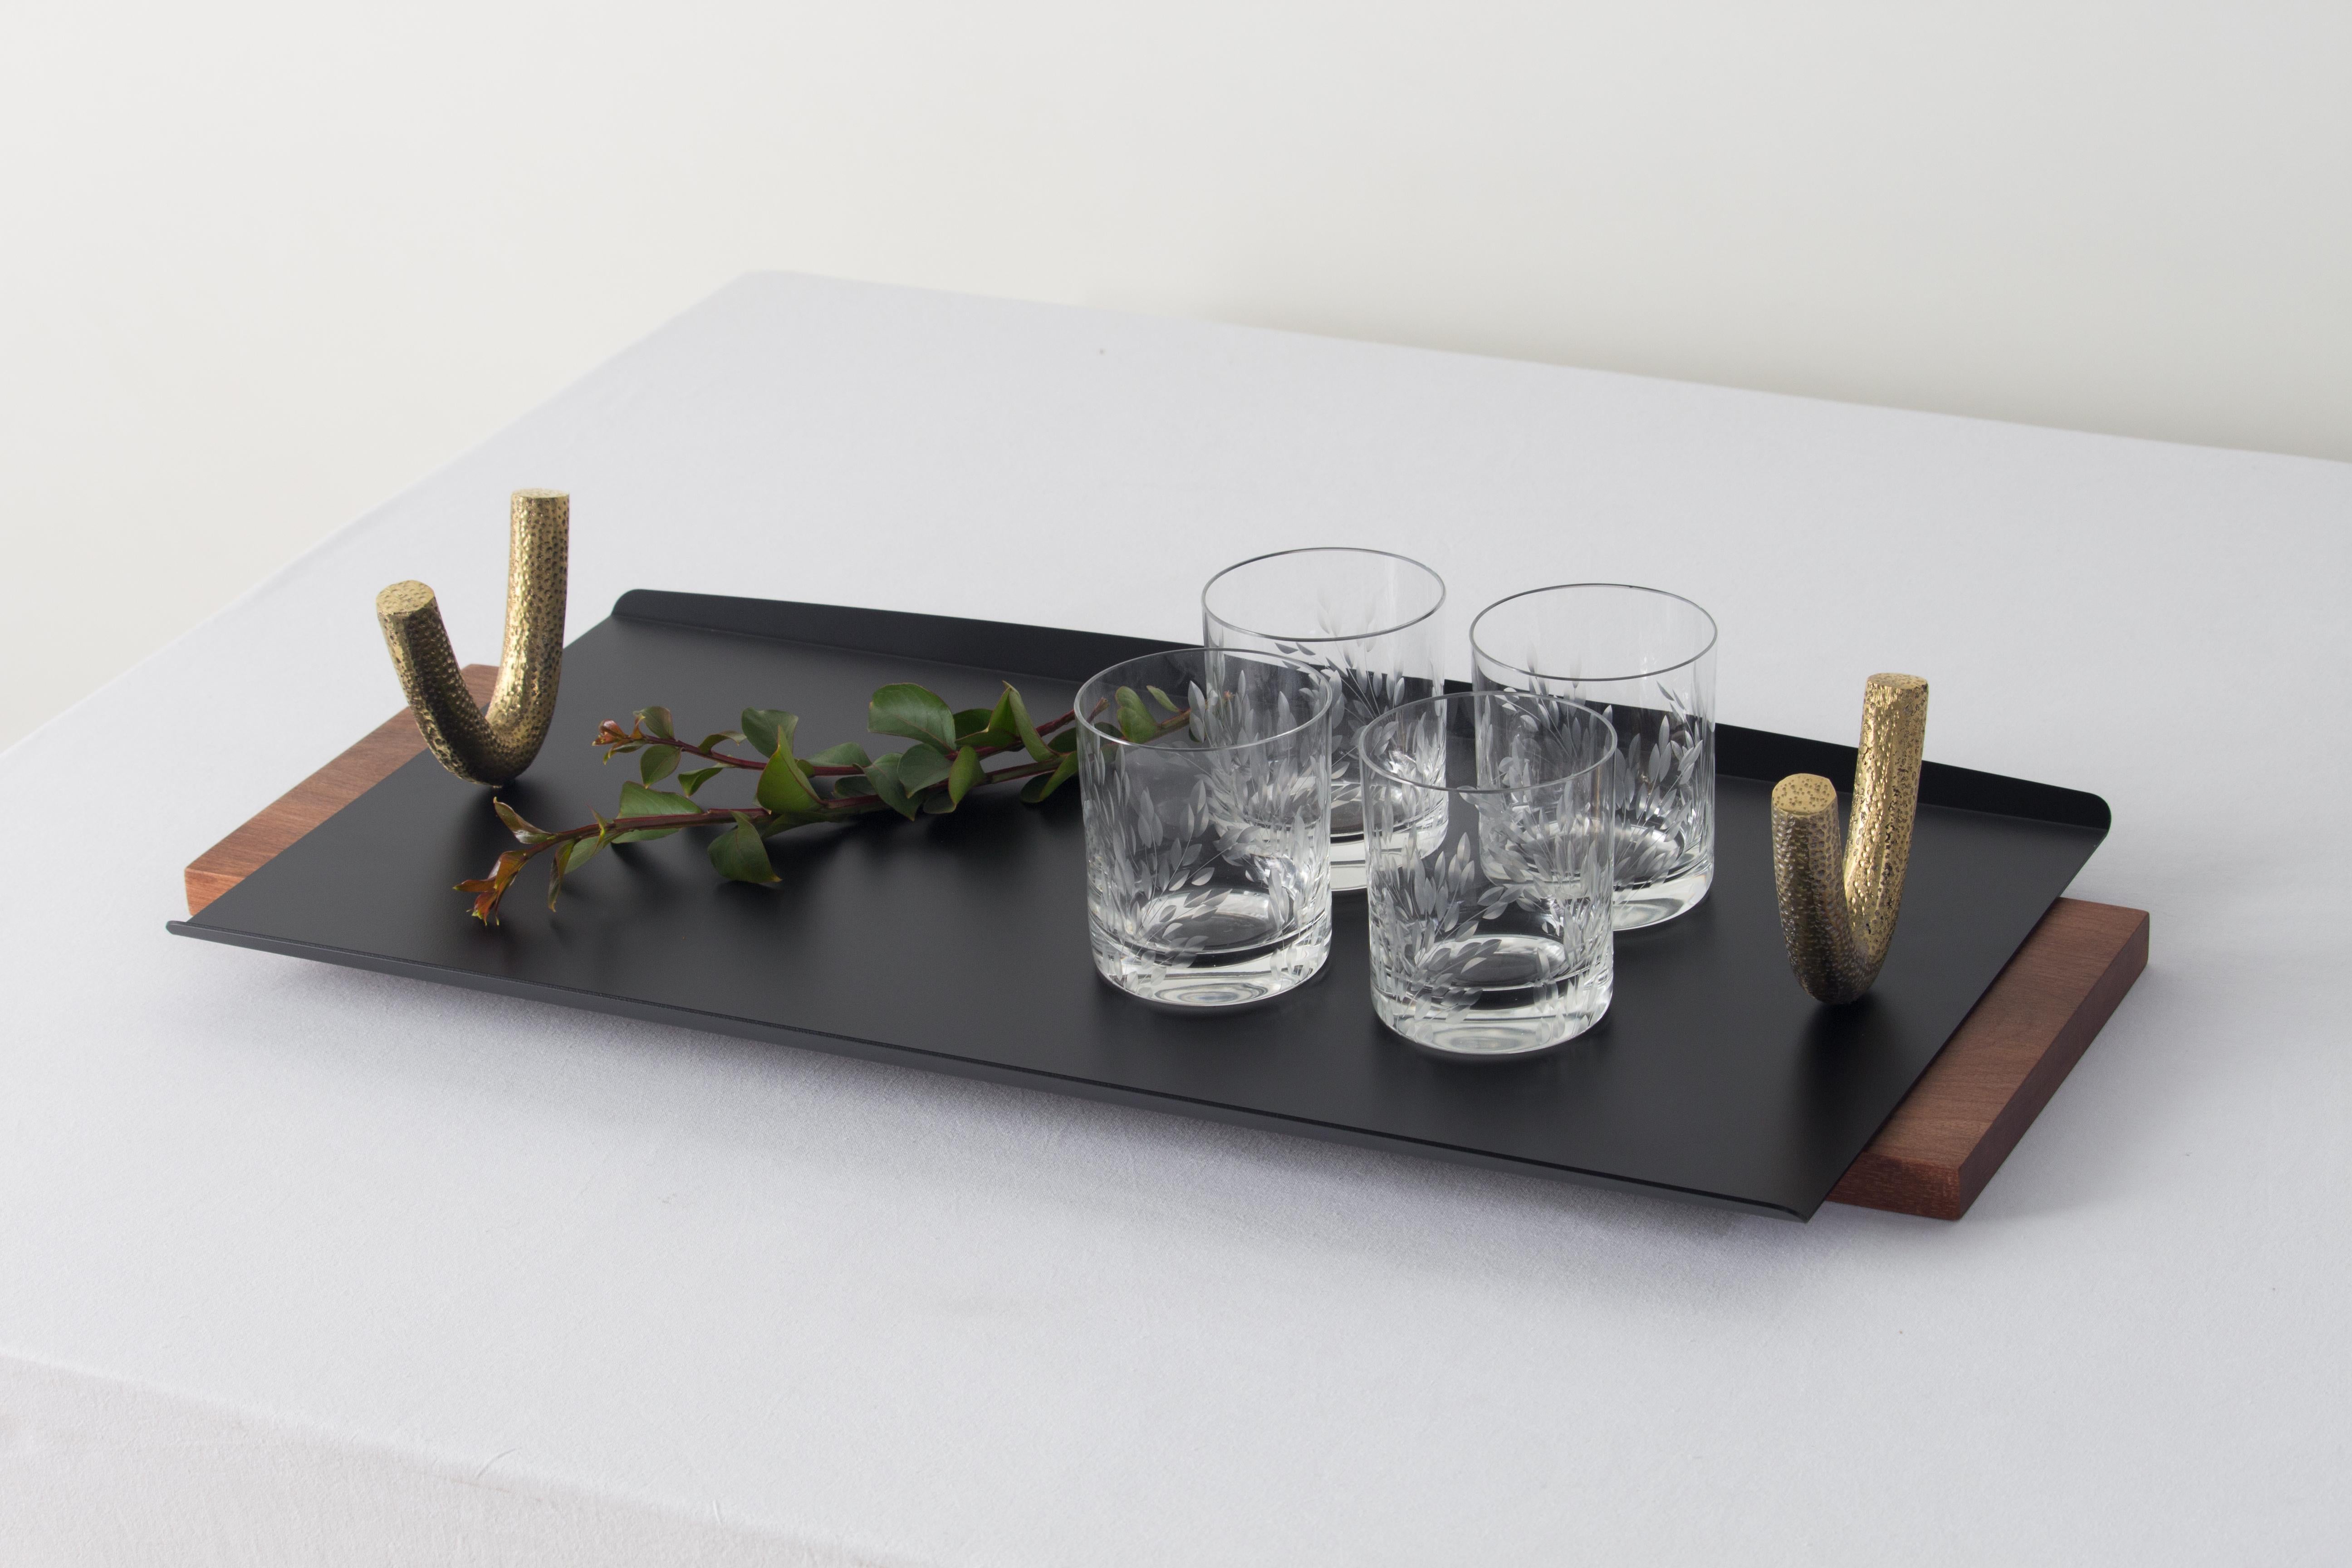 Comprising six containers, two trays and three hangers, the Arco Collection has as a main element the cast metal arcs. The molds for these pieces were manually sculpted out of wood, carrying a texture that grants an organic irregularity to these